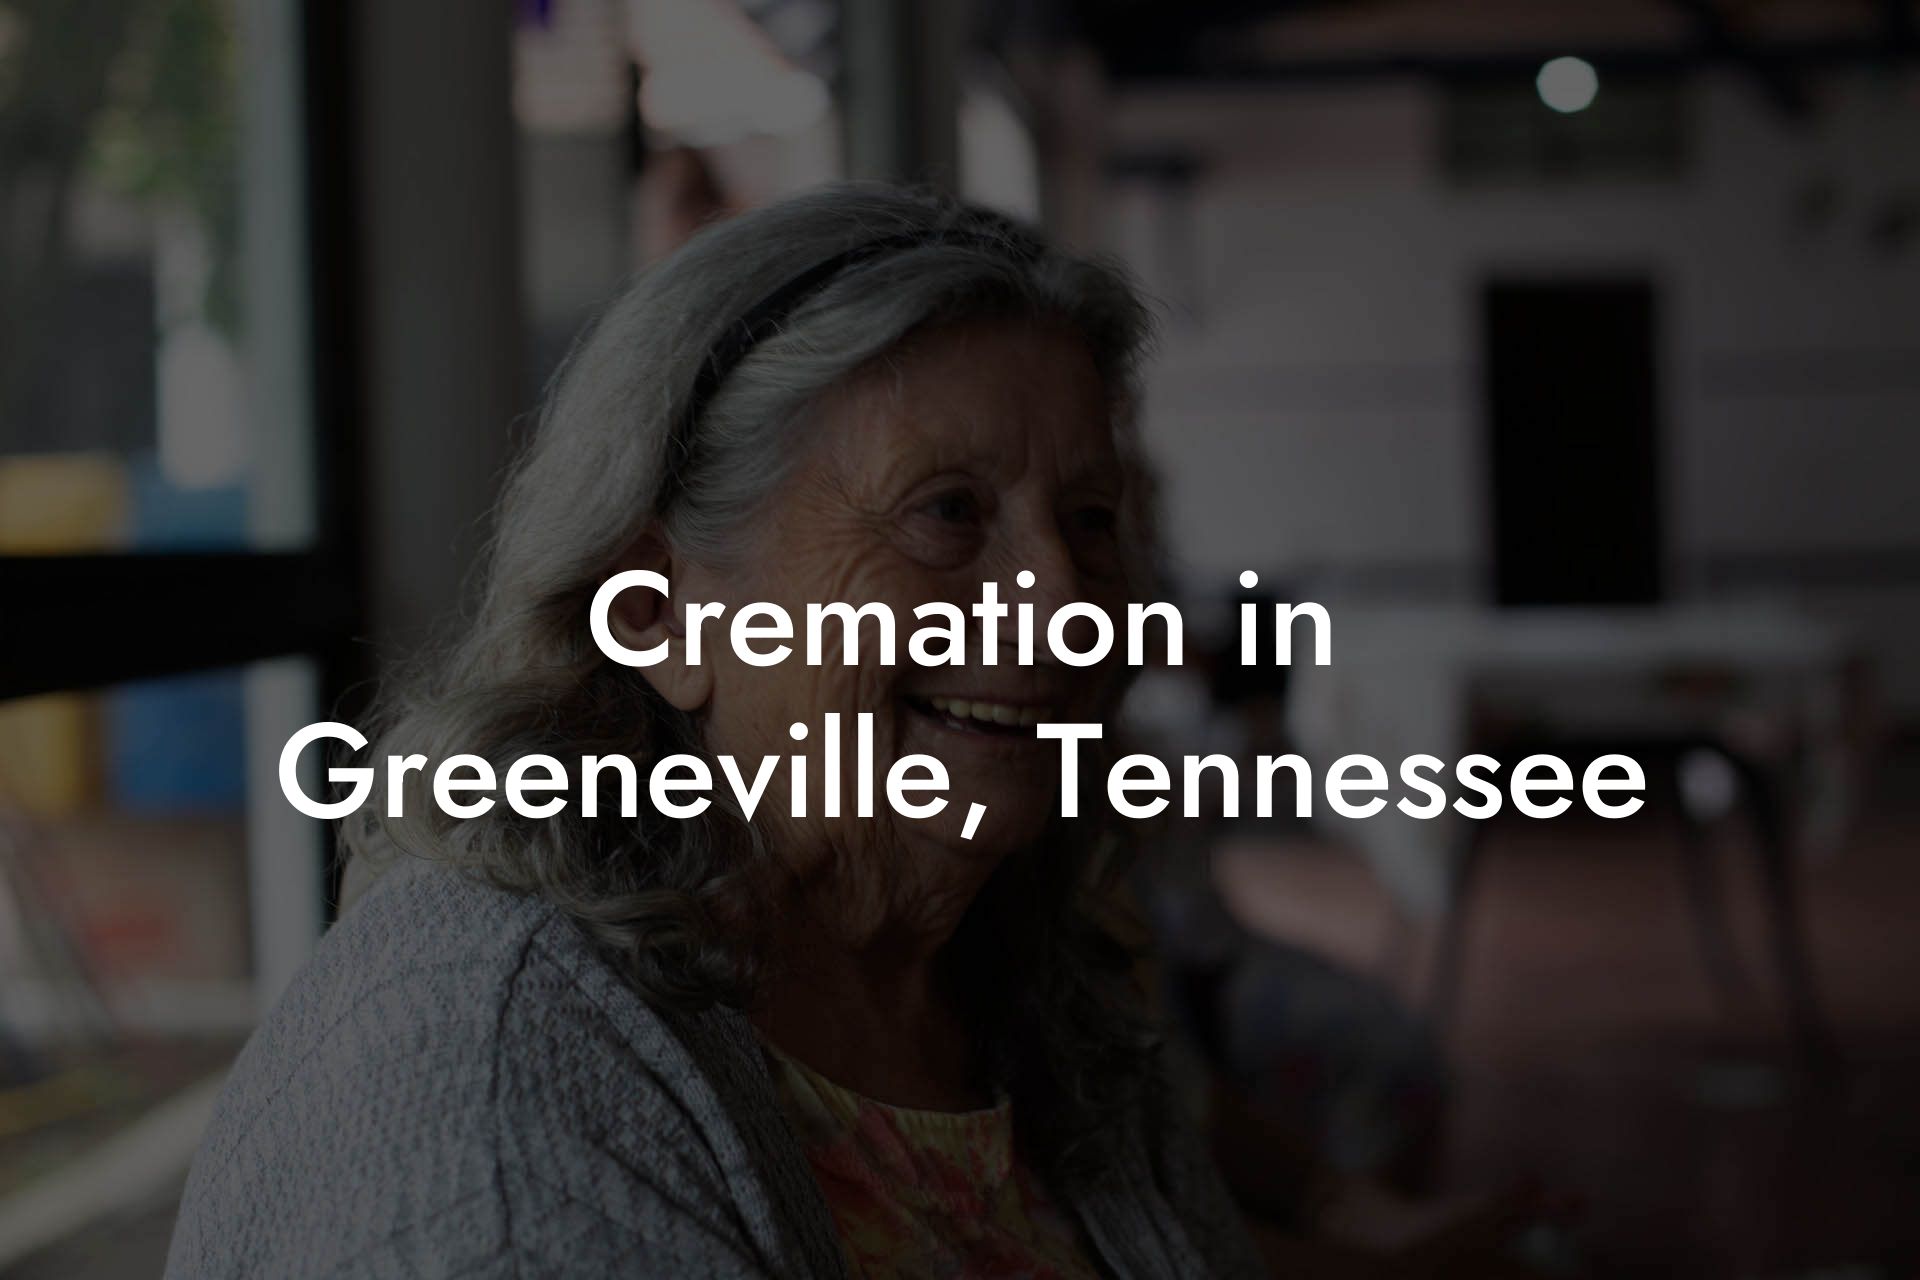 Cremation in Greeneville, Tennessee